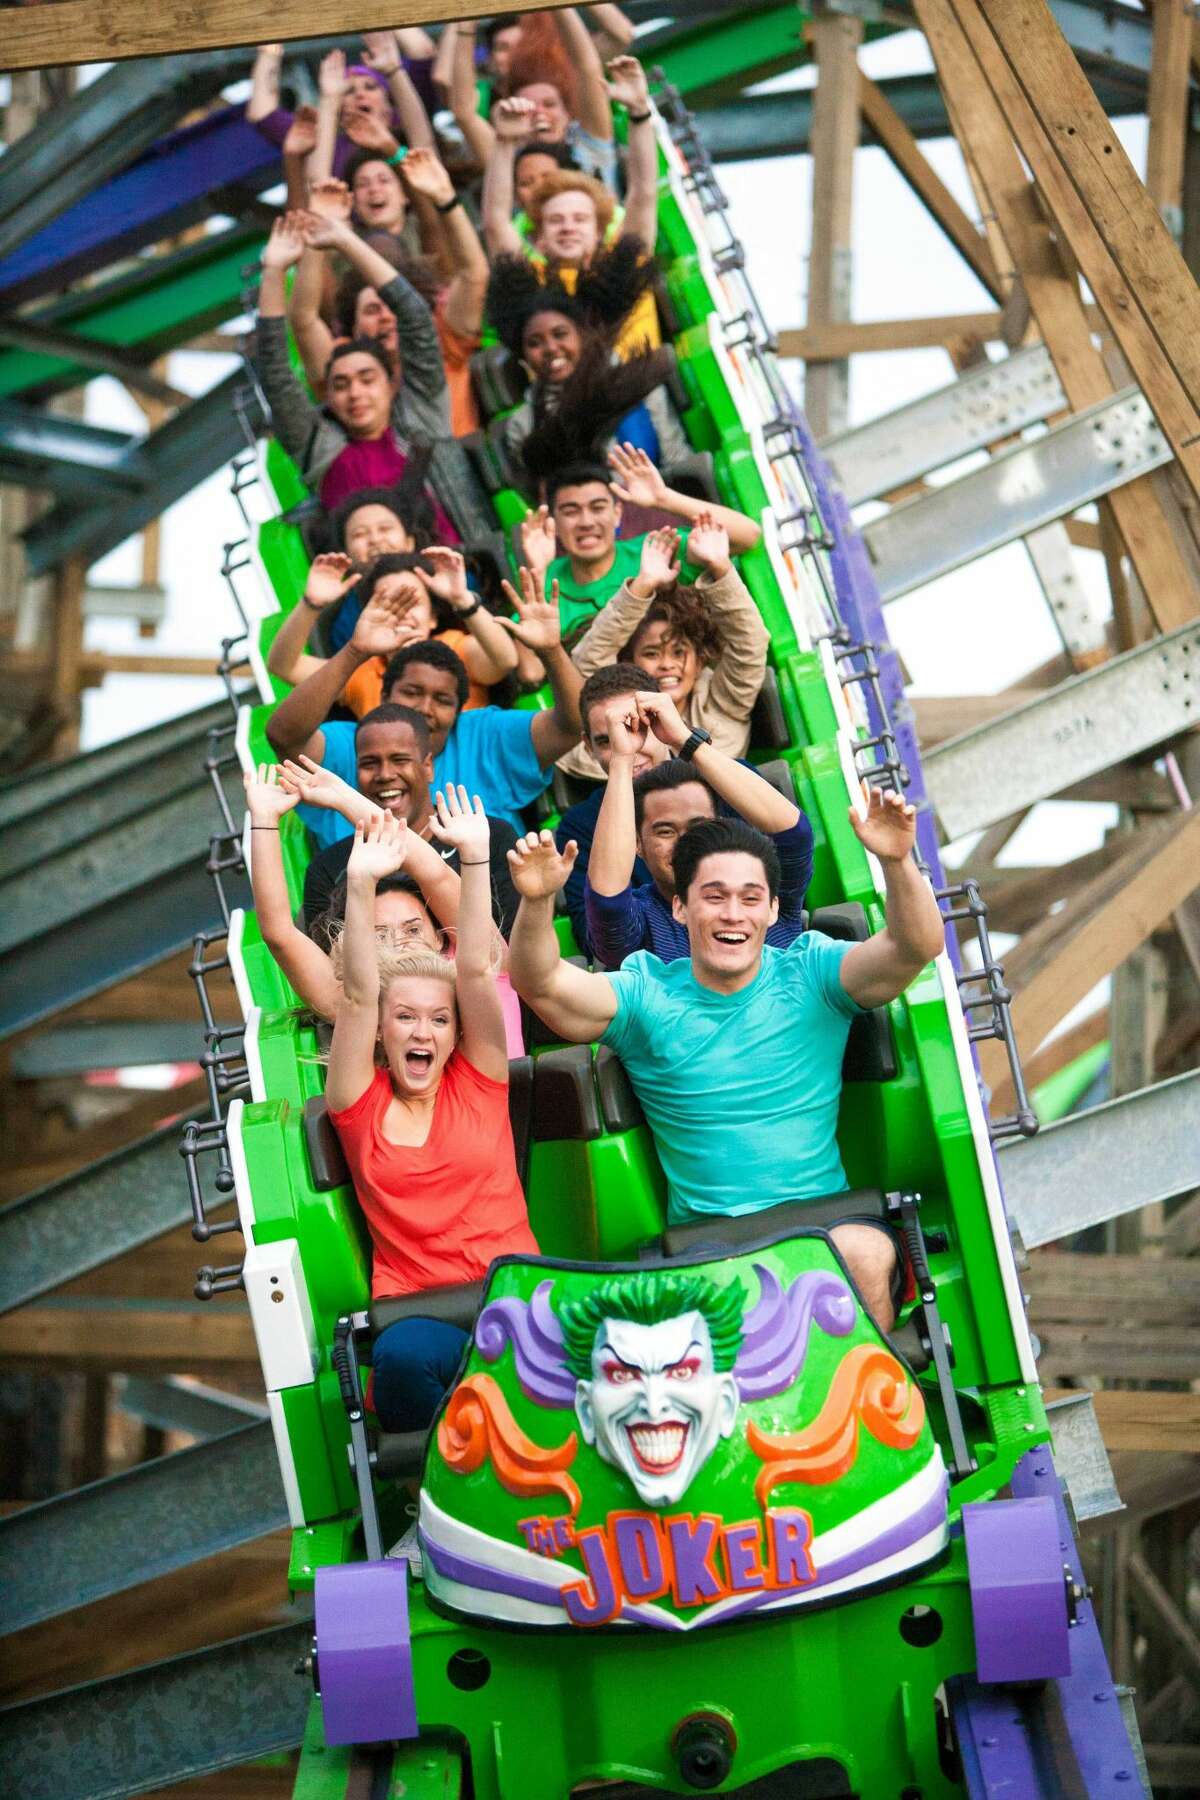 Take a 360º ride on the allnew Joker roller coaster at Six Flags